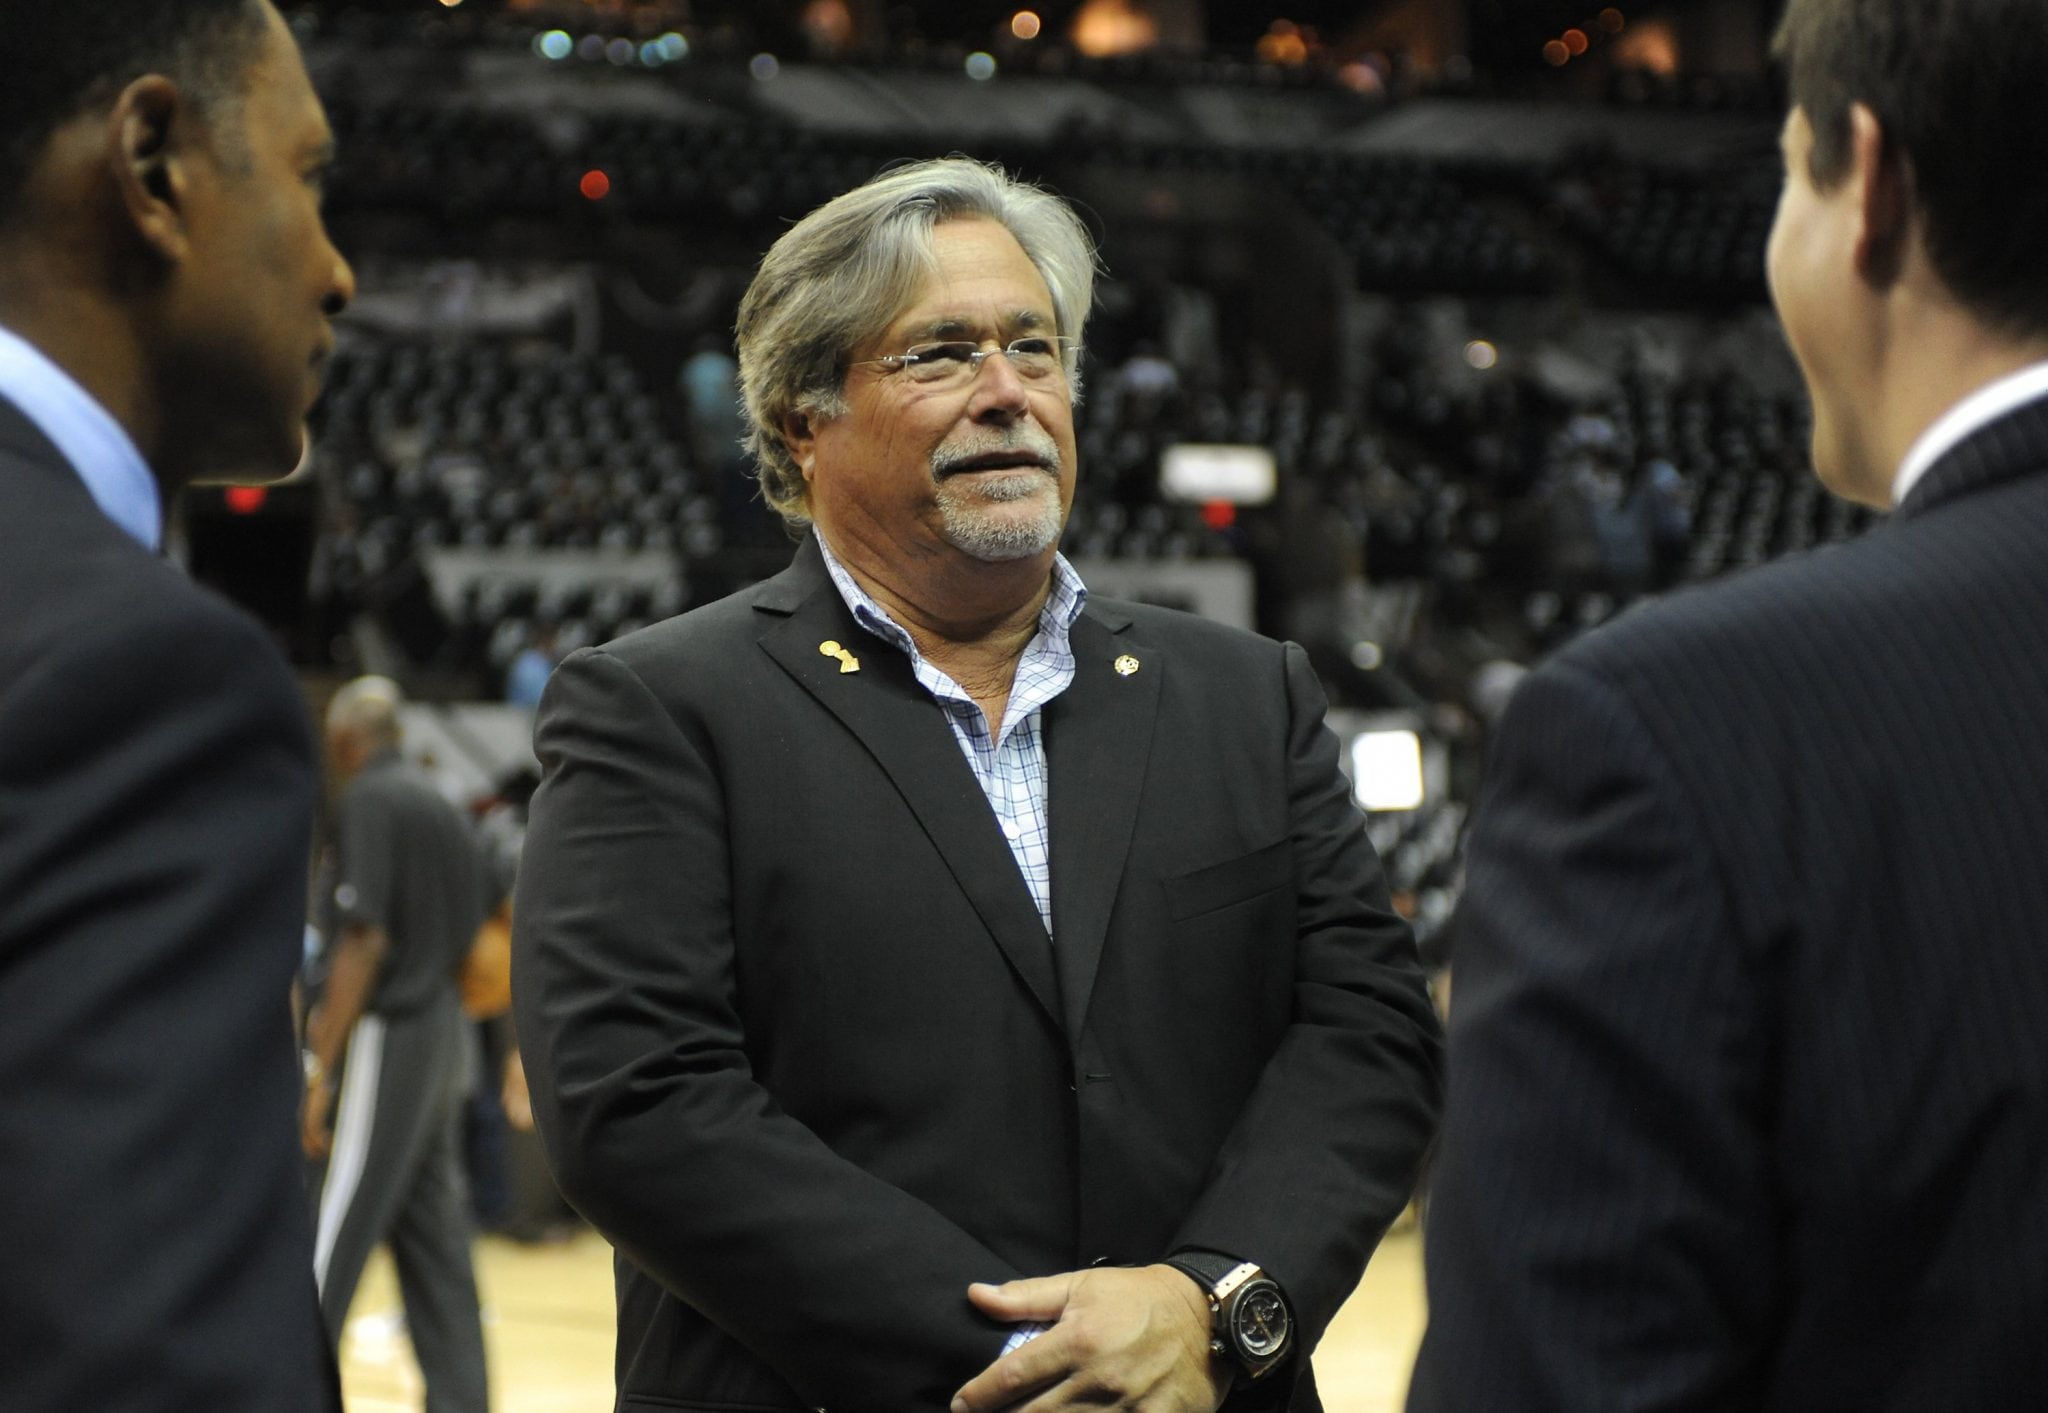 Miami Heat owner Micky Arison is seen prior to the start in Game 5 of the NBA Finals against the San Antonio Spurs at the AT&T Center in San Antonio, Texas, Sunday, June 16, 2013. 